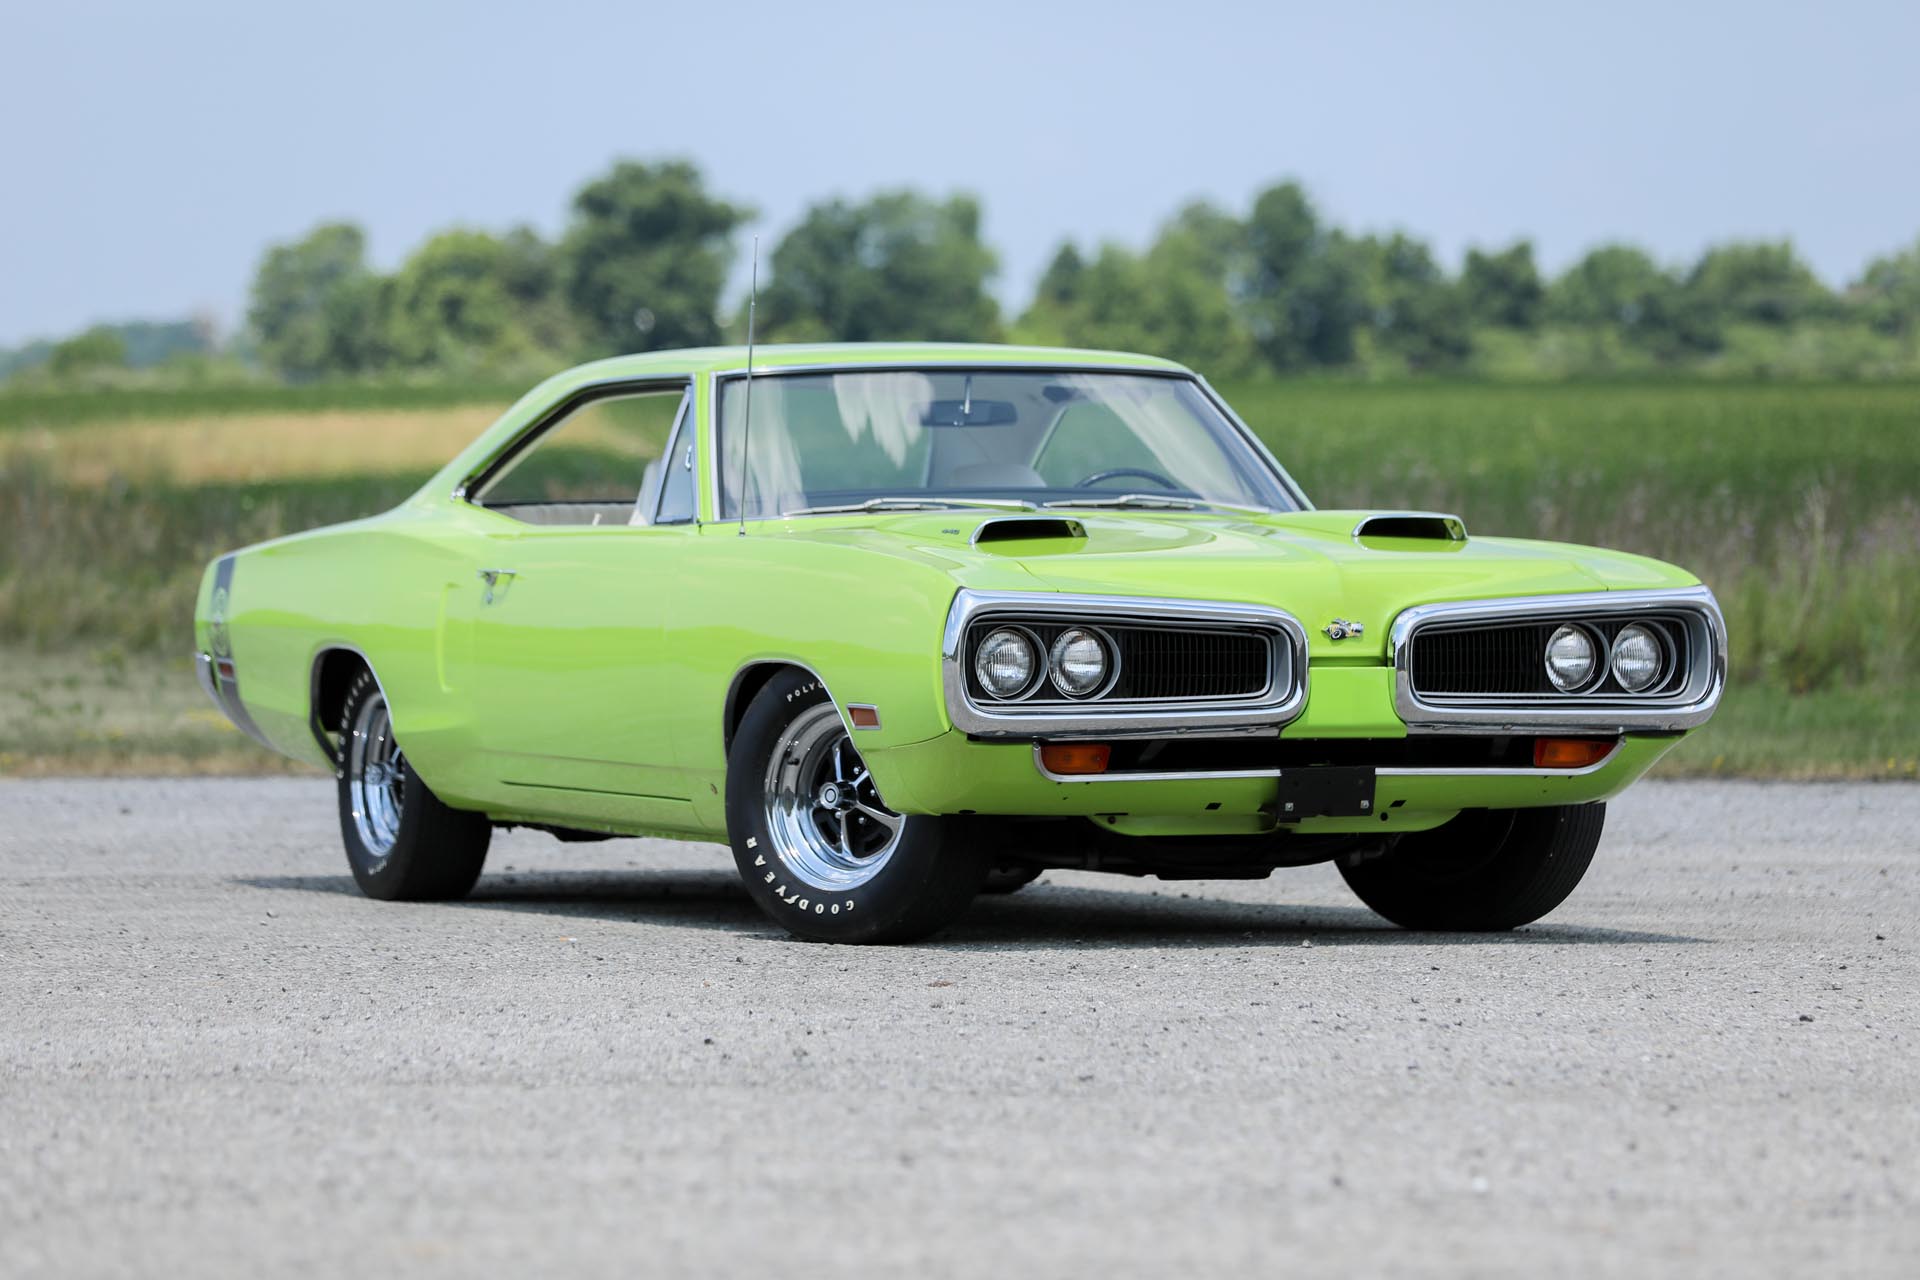 Sublime Green 1970 Dodge Coronet Super Bee 440 Six Pack Begs to Be Driven  Hard - autoevolution